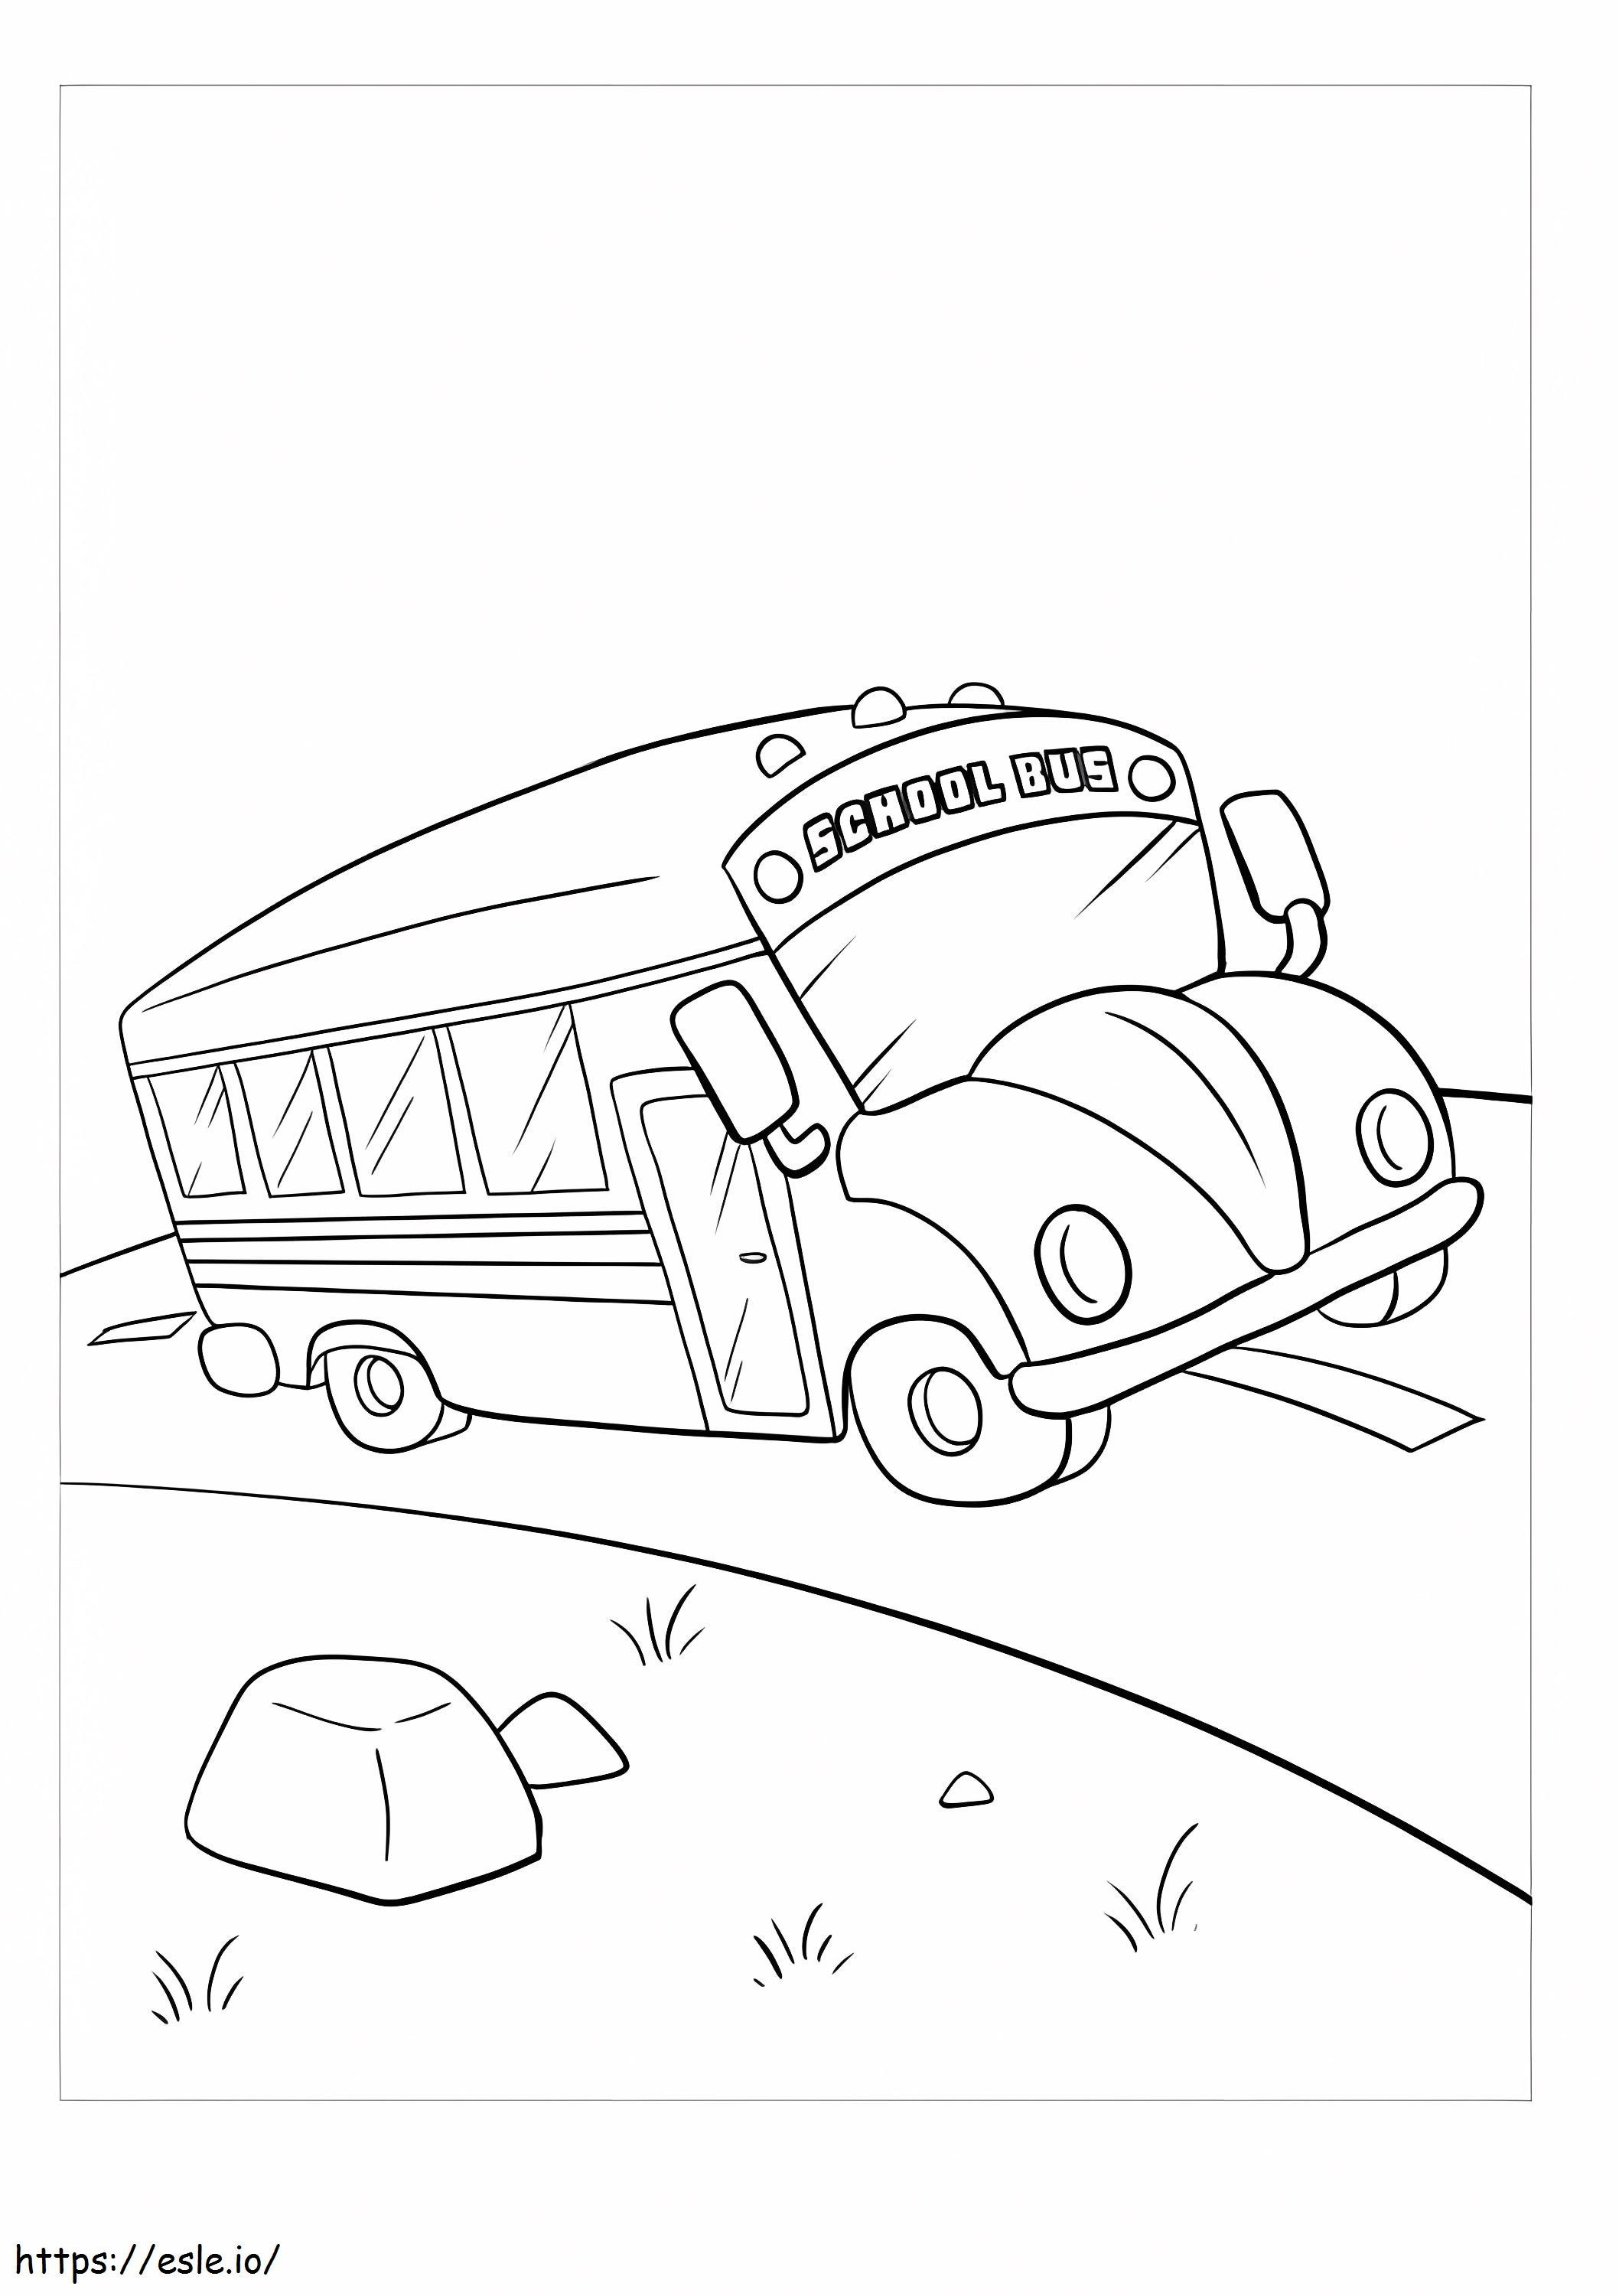 School Bus On The Road coloring page